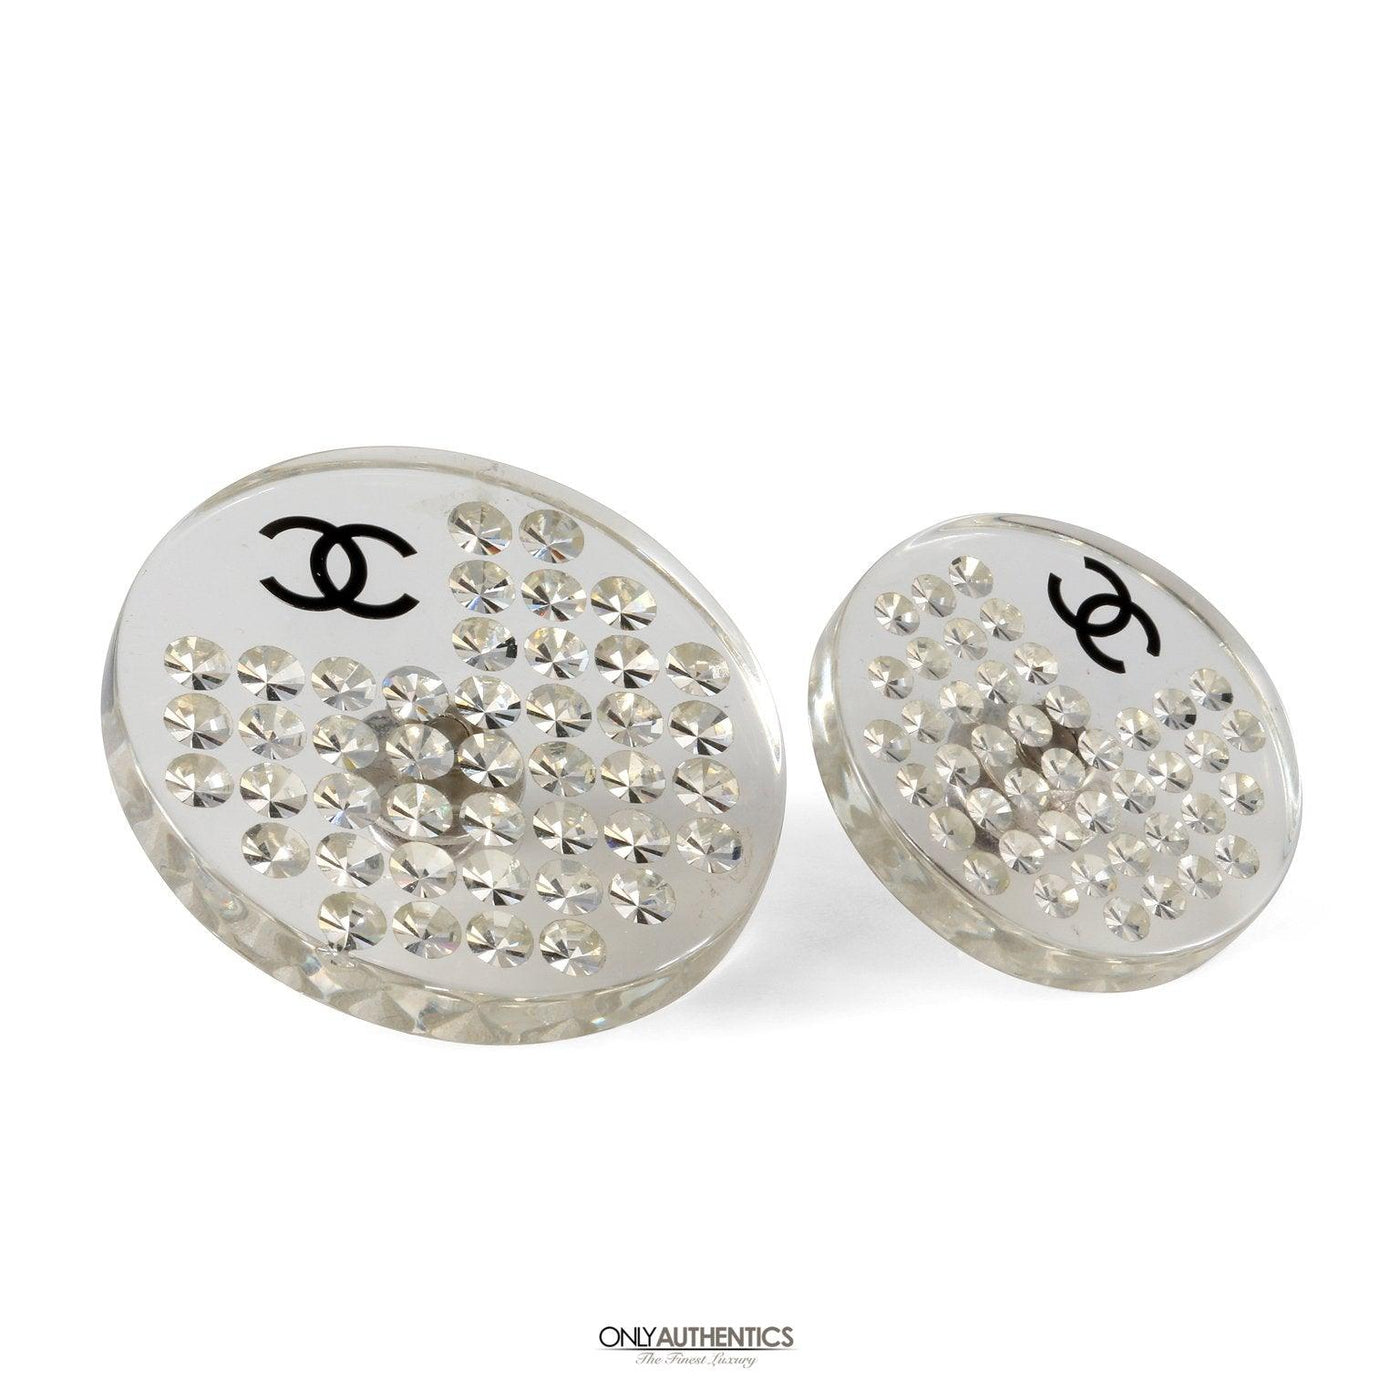 Chanel Lucite and Crystal Disc Pins - Only Authentics